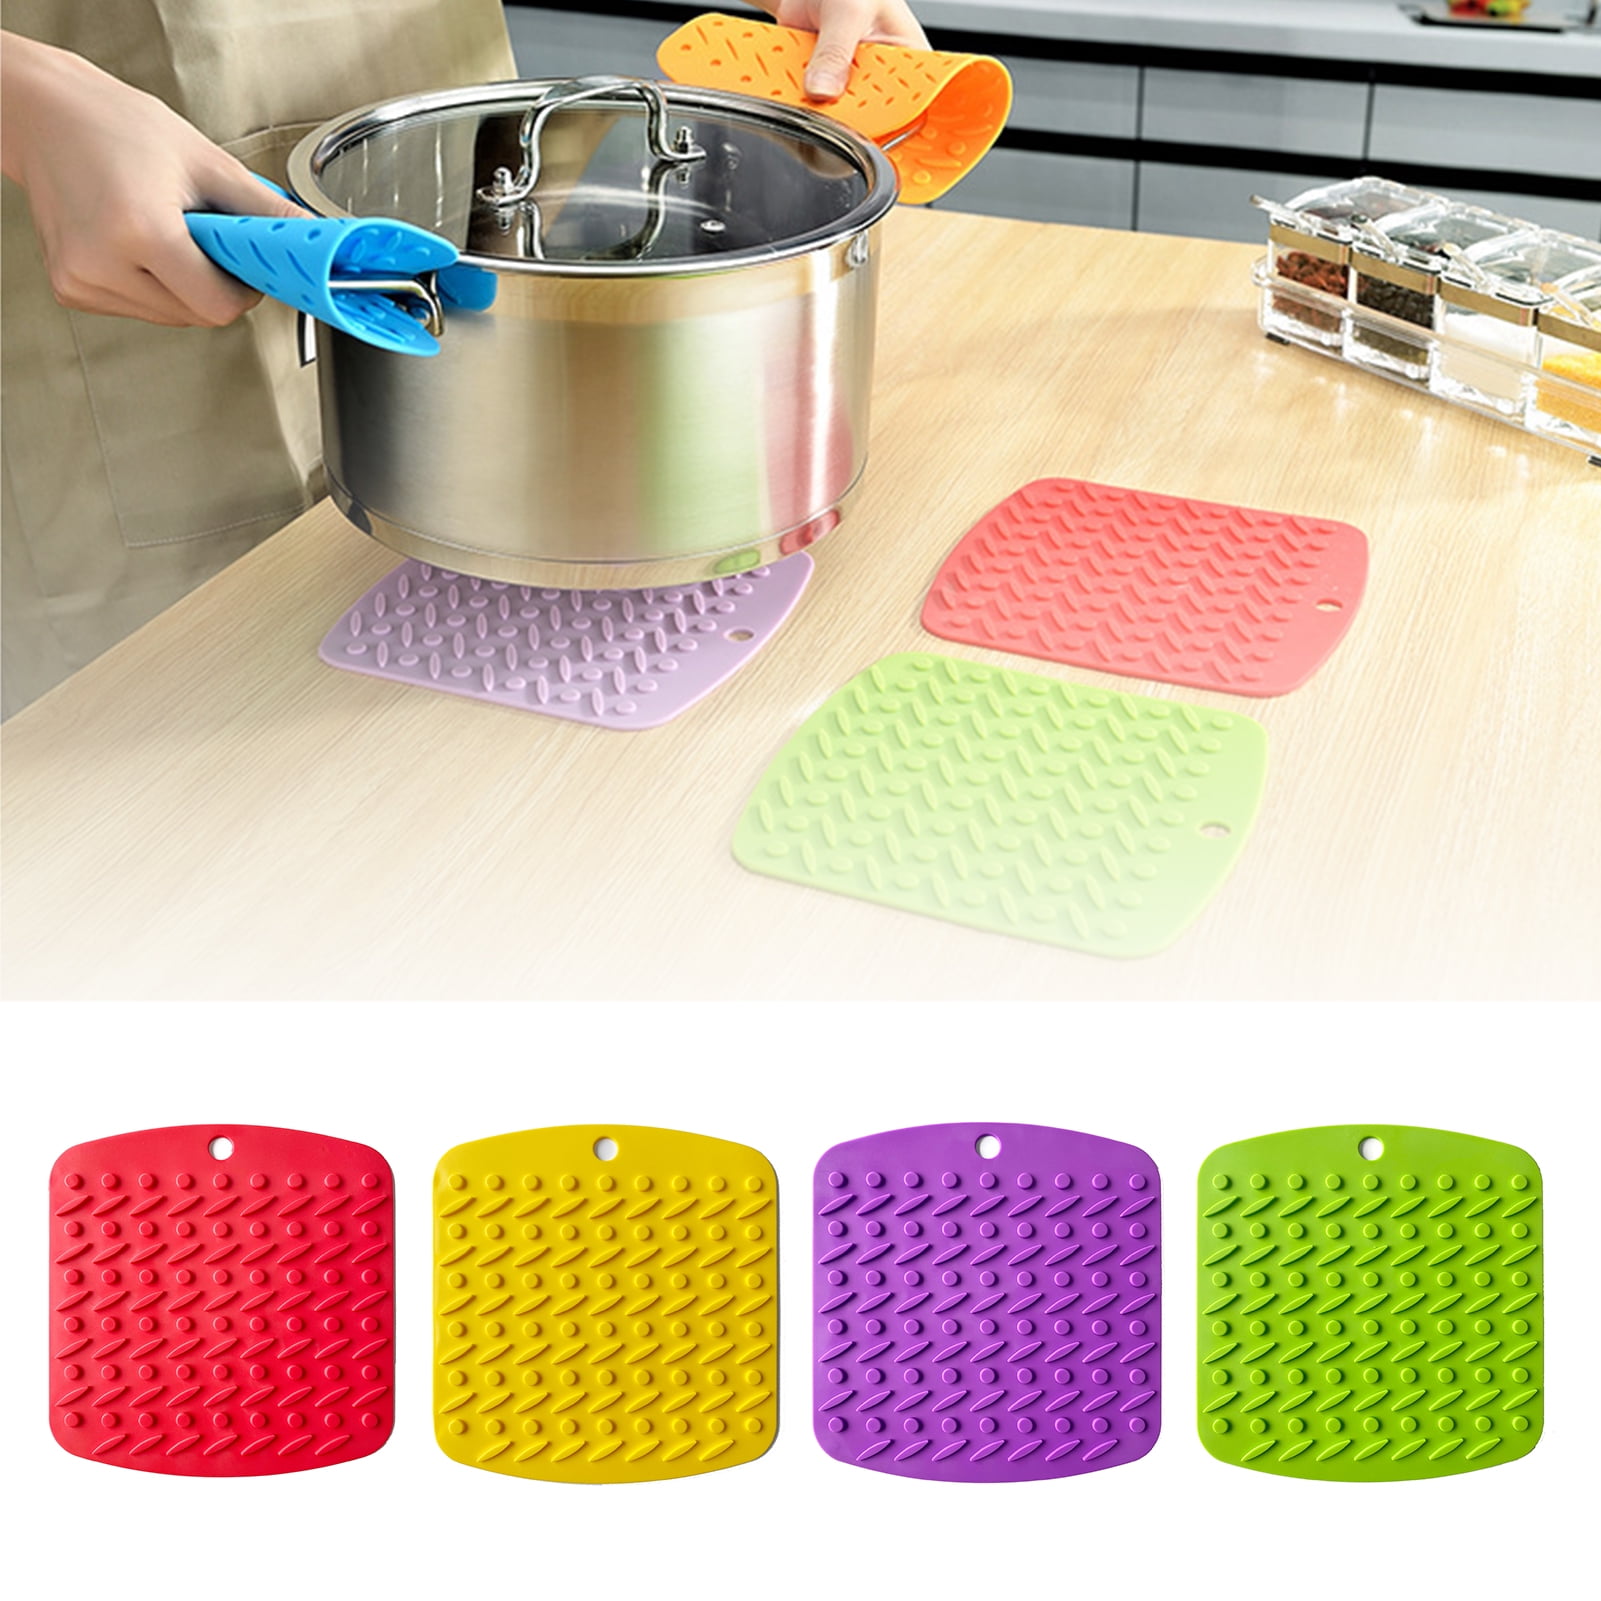 Compact Anti Slip Silicone Silicone Table Mats For Dining Room, Restaurant,  And Fruit Washing From Seekae, $14.41